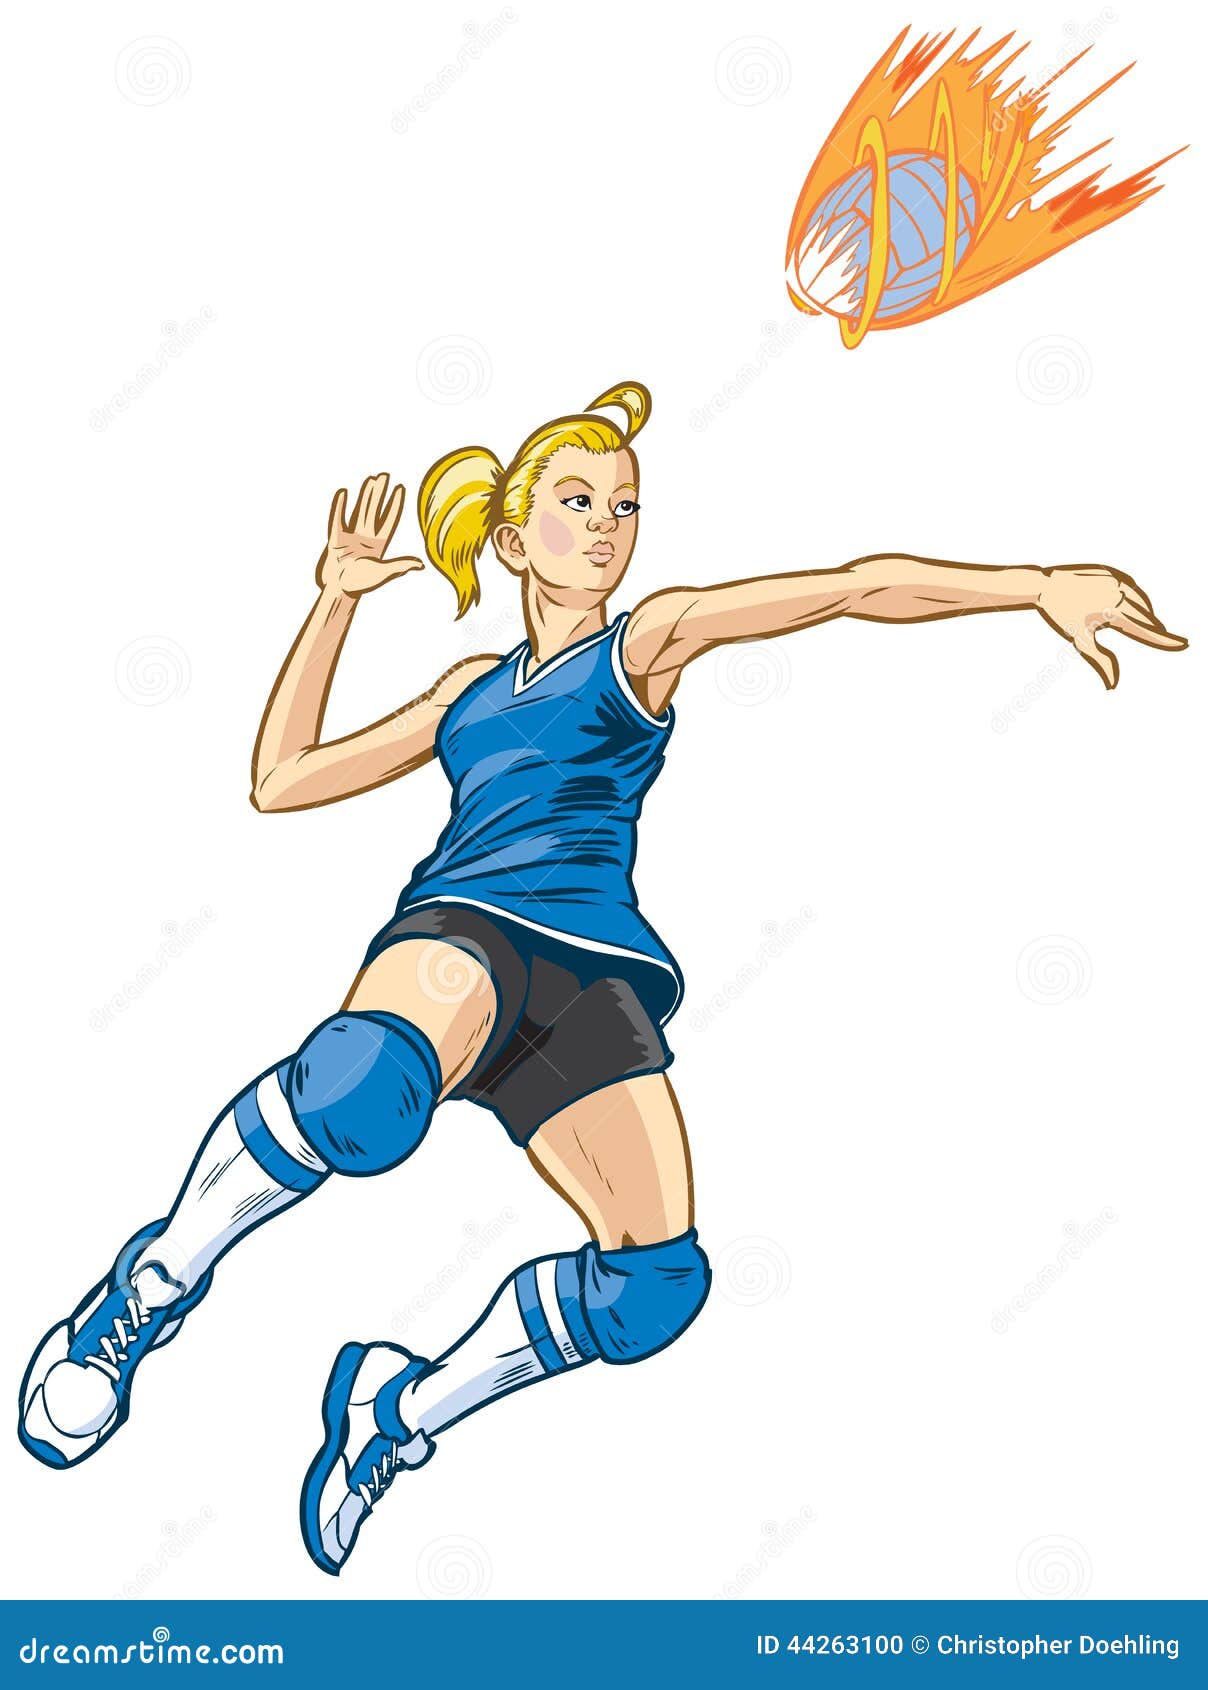 clipart girl volleyball player - photo #31